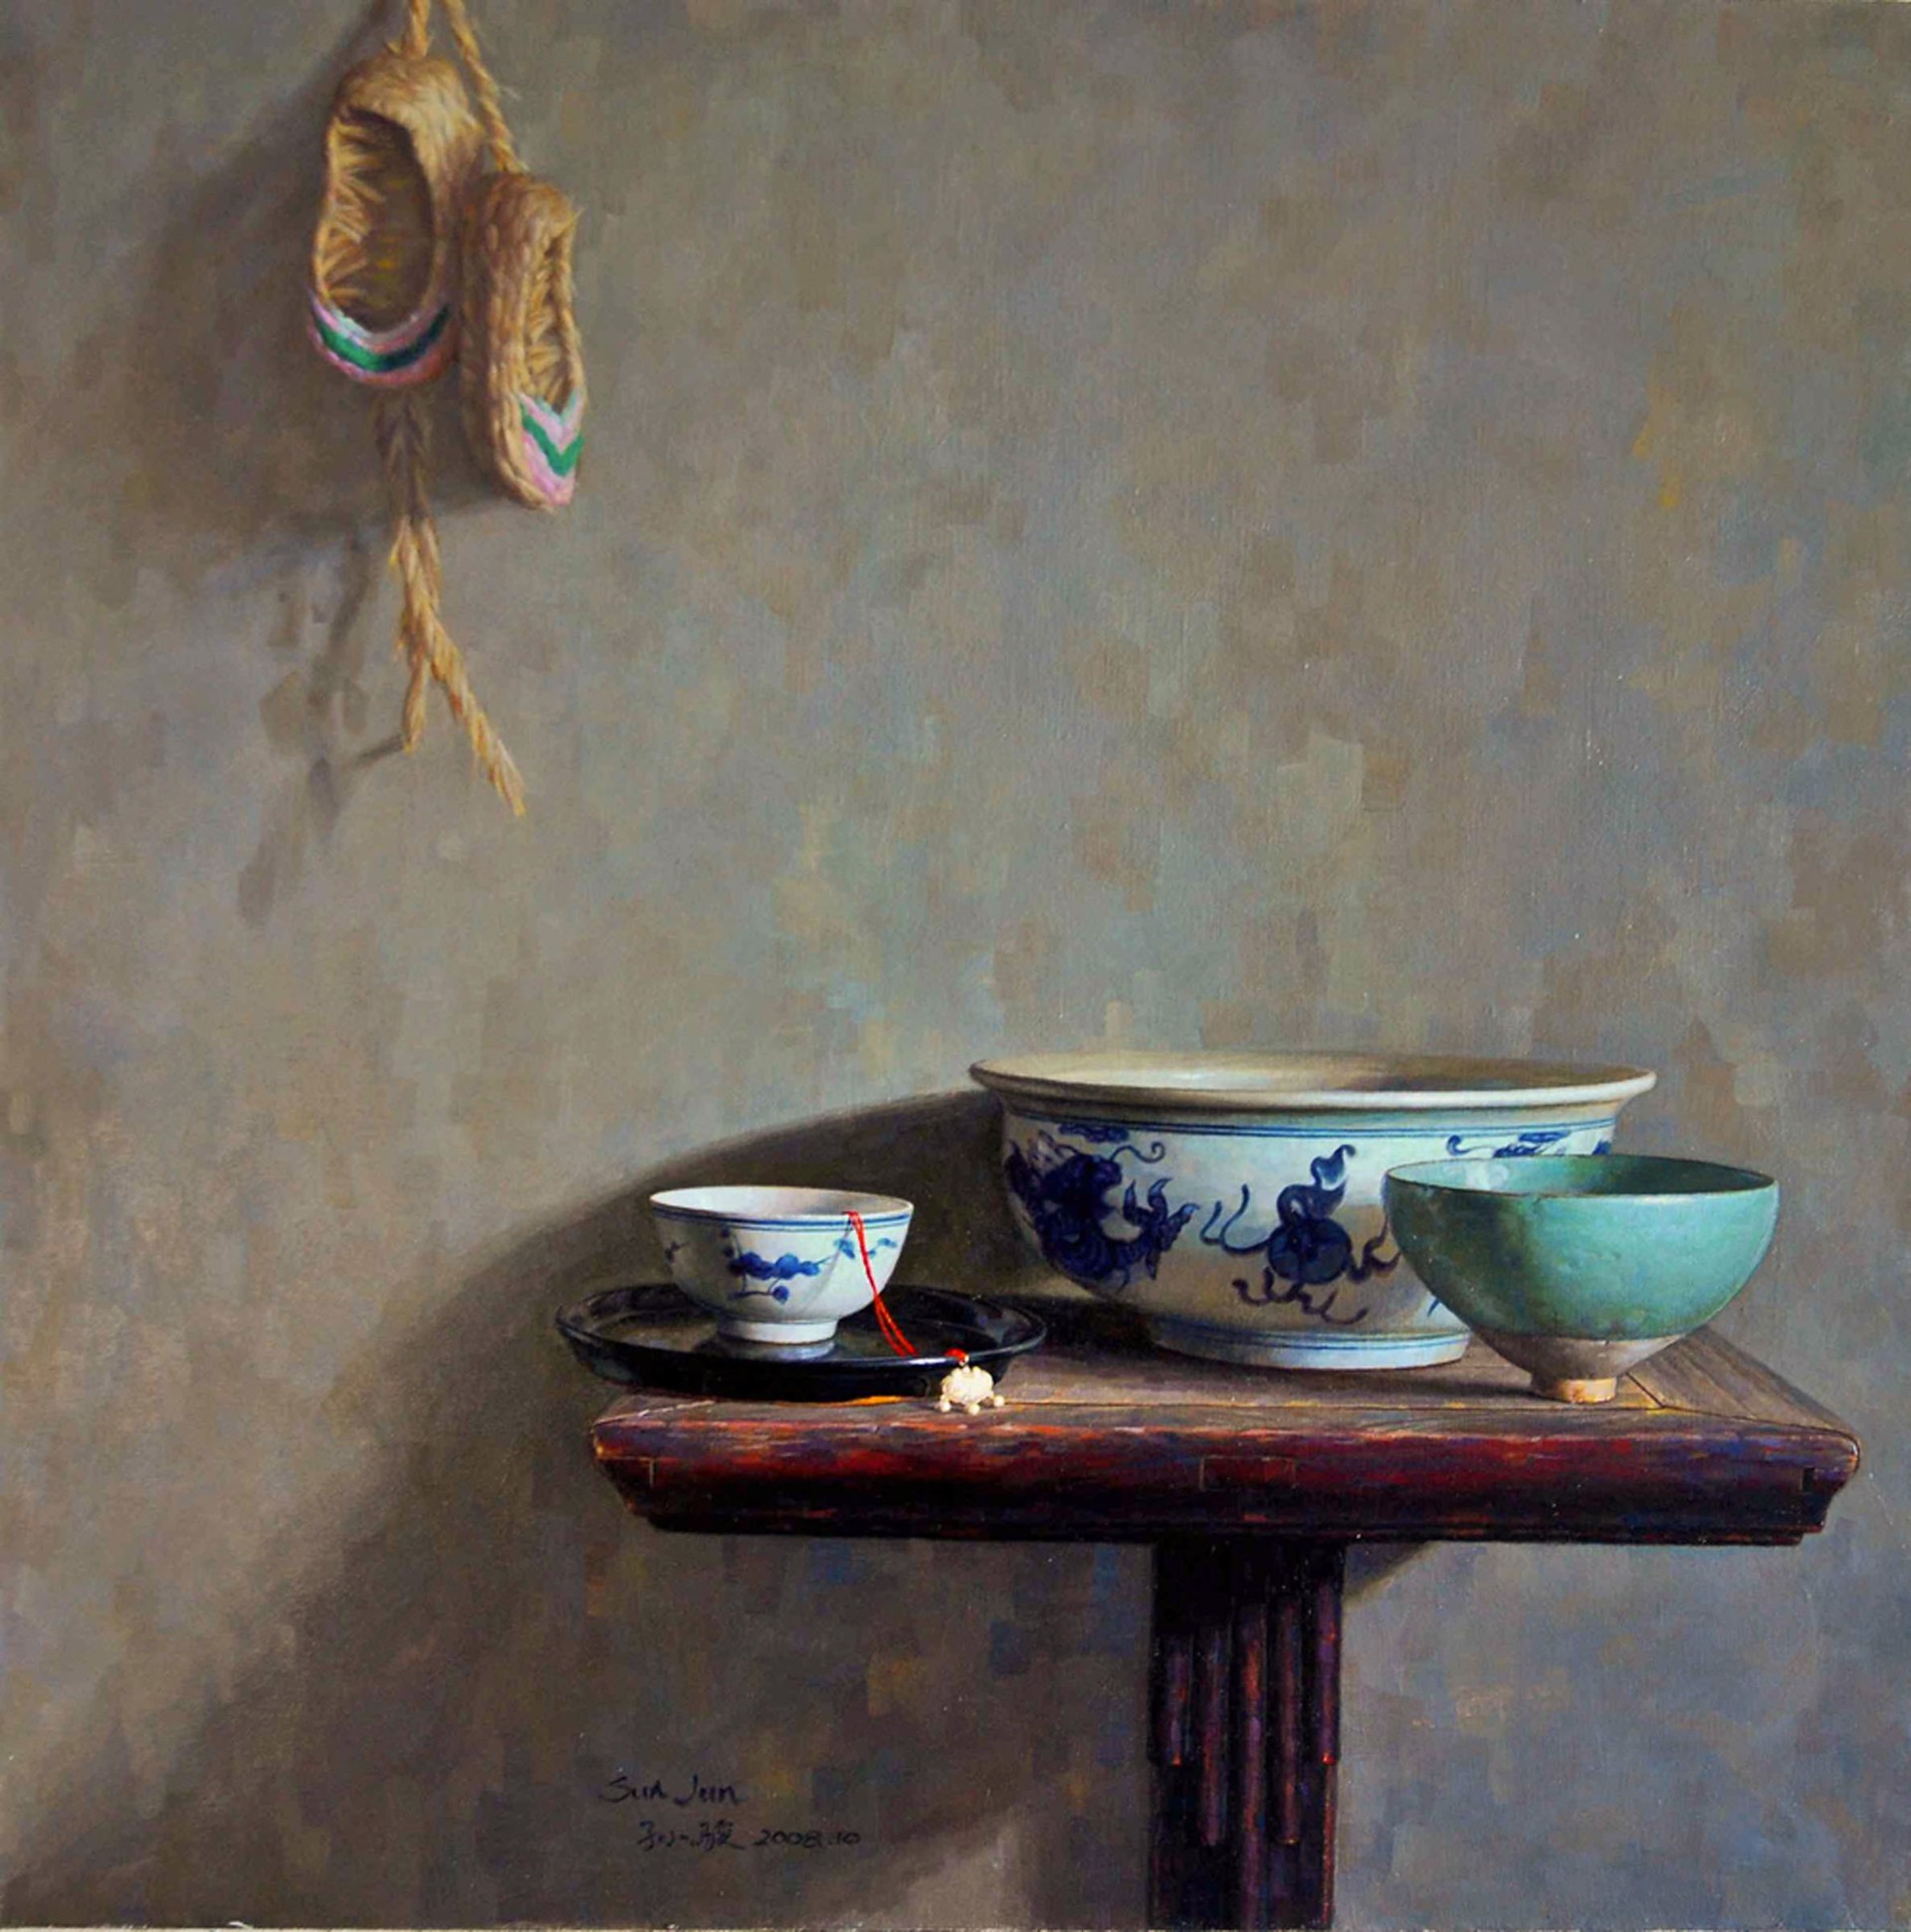 Still Life with Straw Sandals by Sun Jun